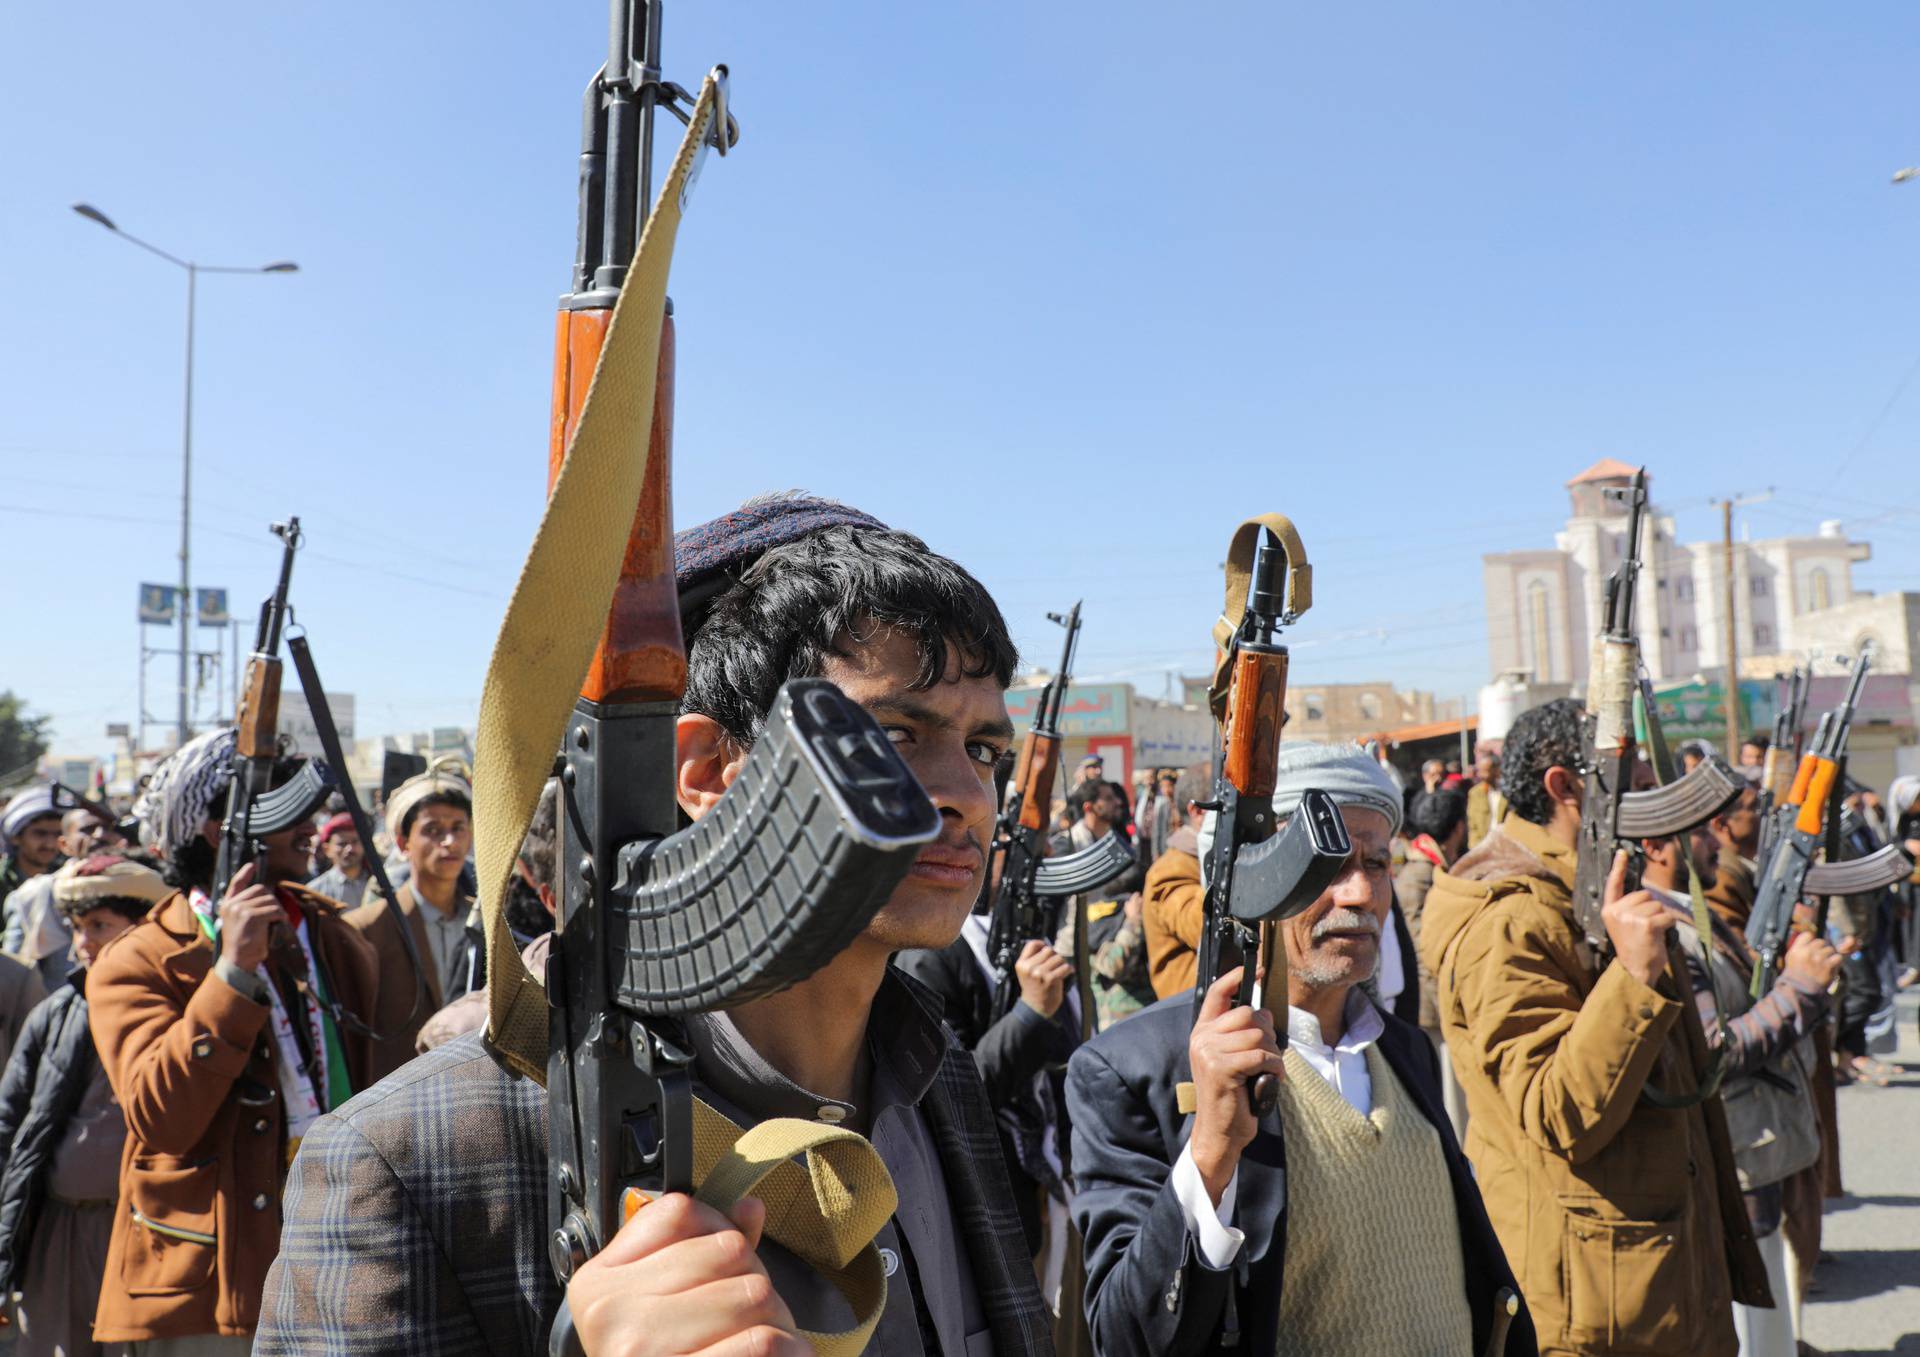 Newly recruited Houthi fighters hold up firearms during a ceremony at the end of his training in Sanaa